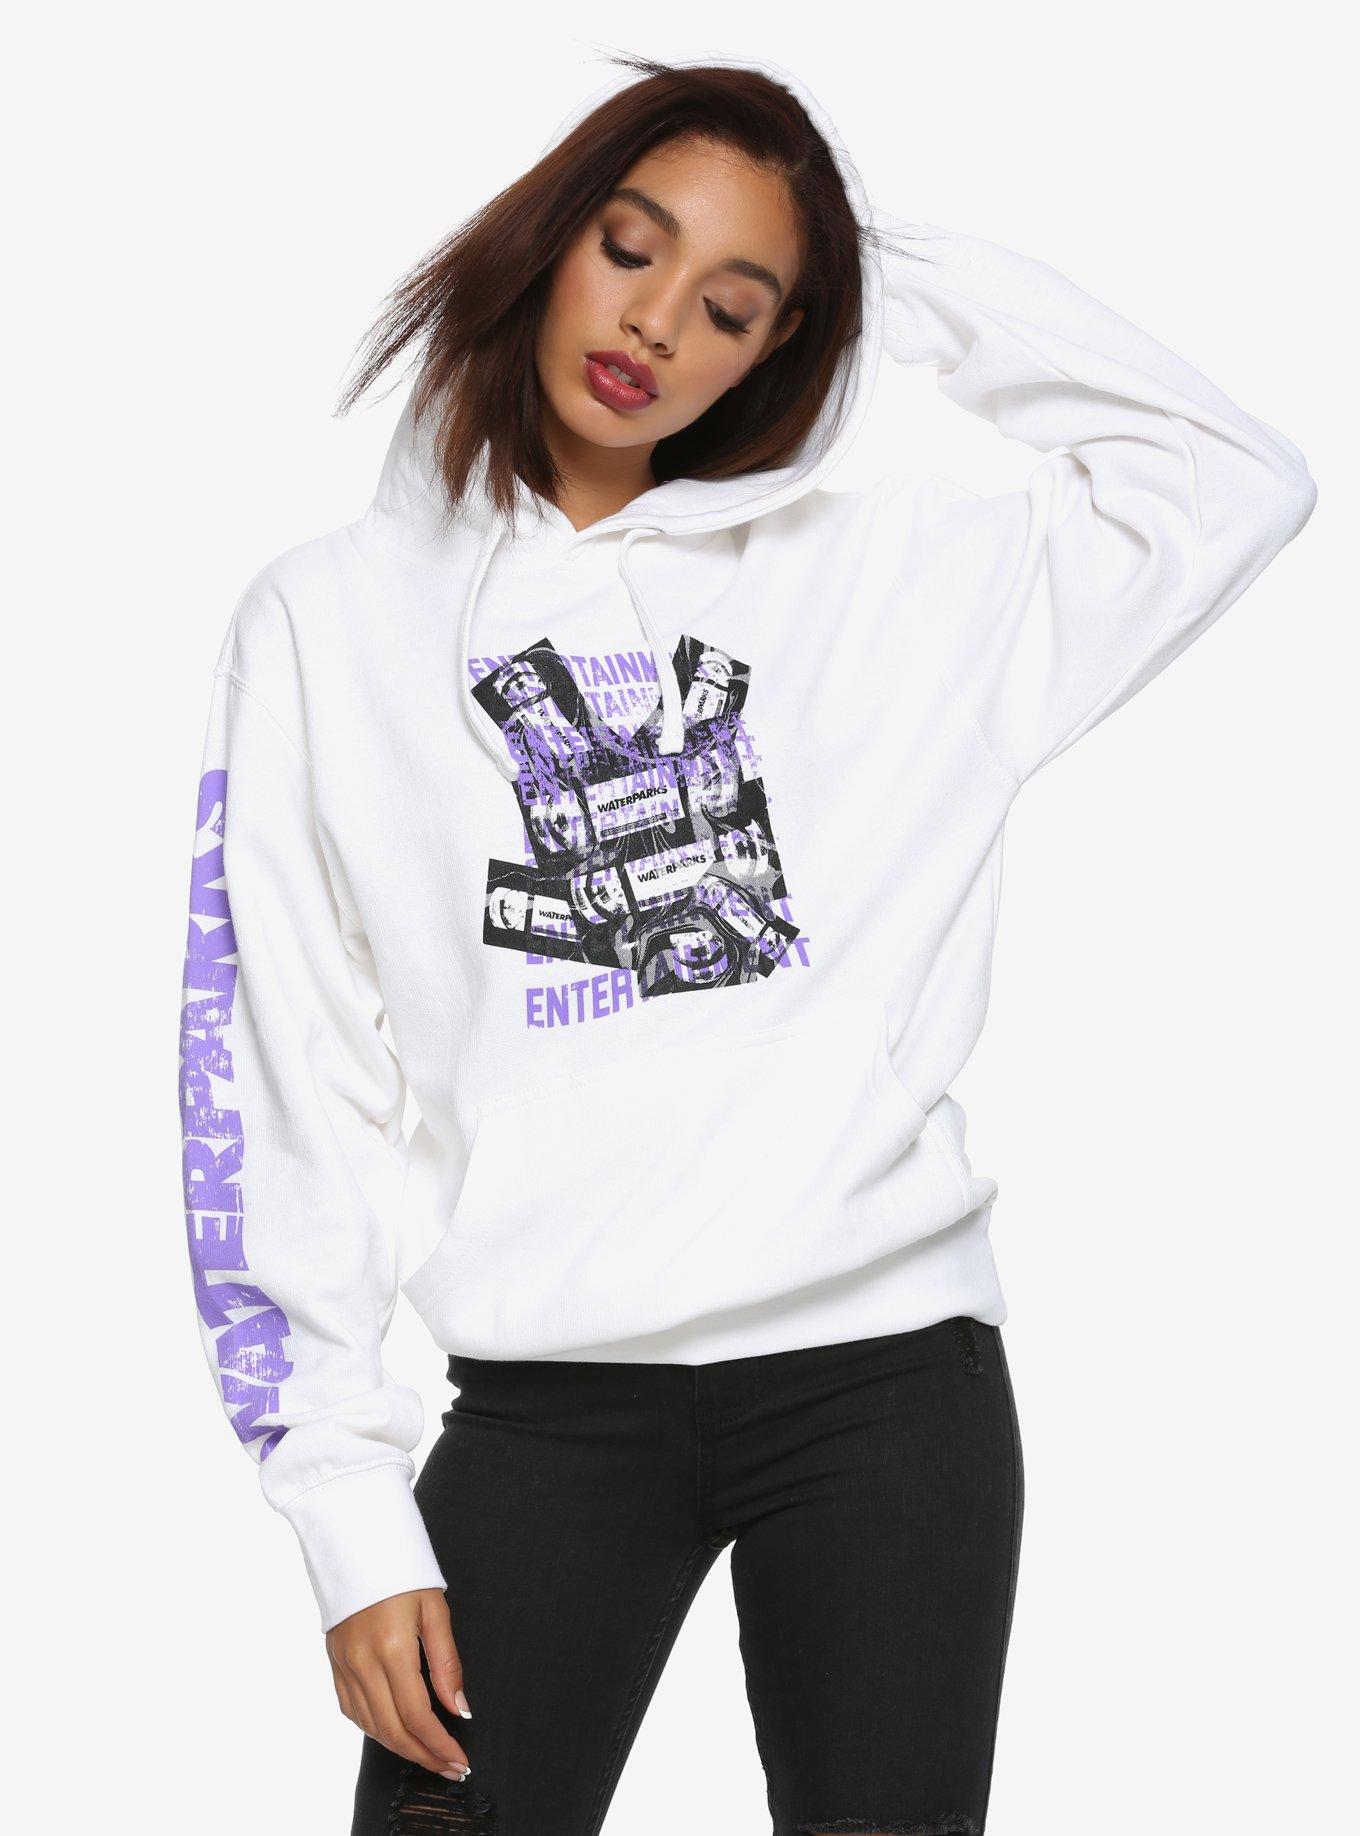 Waterparks Entertainment Girls Hoodie | Hot Topic